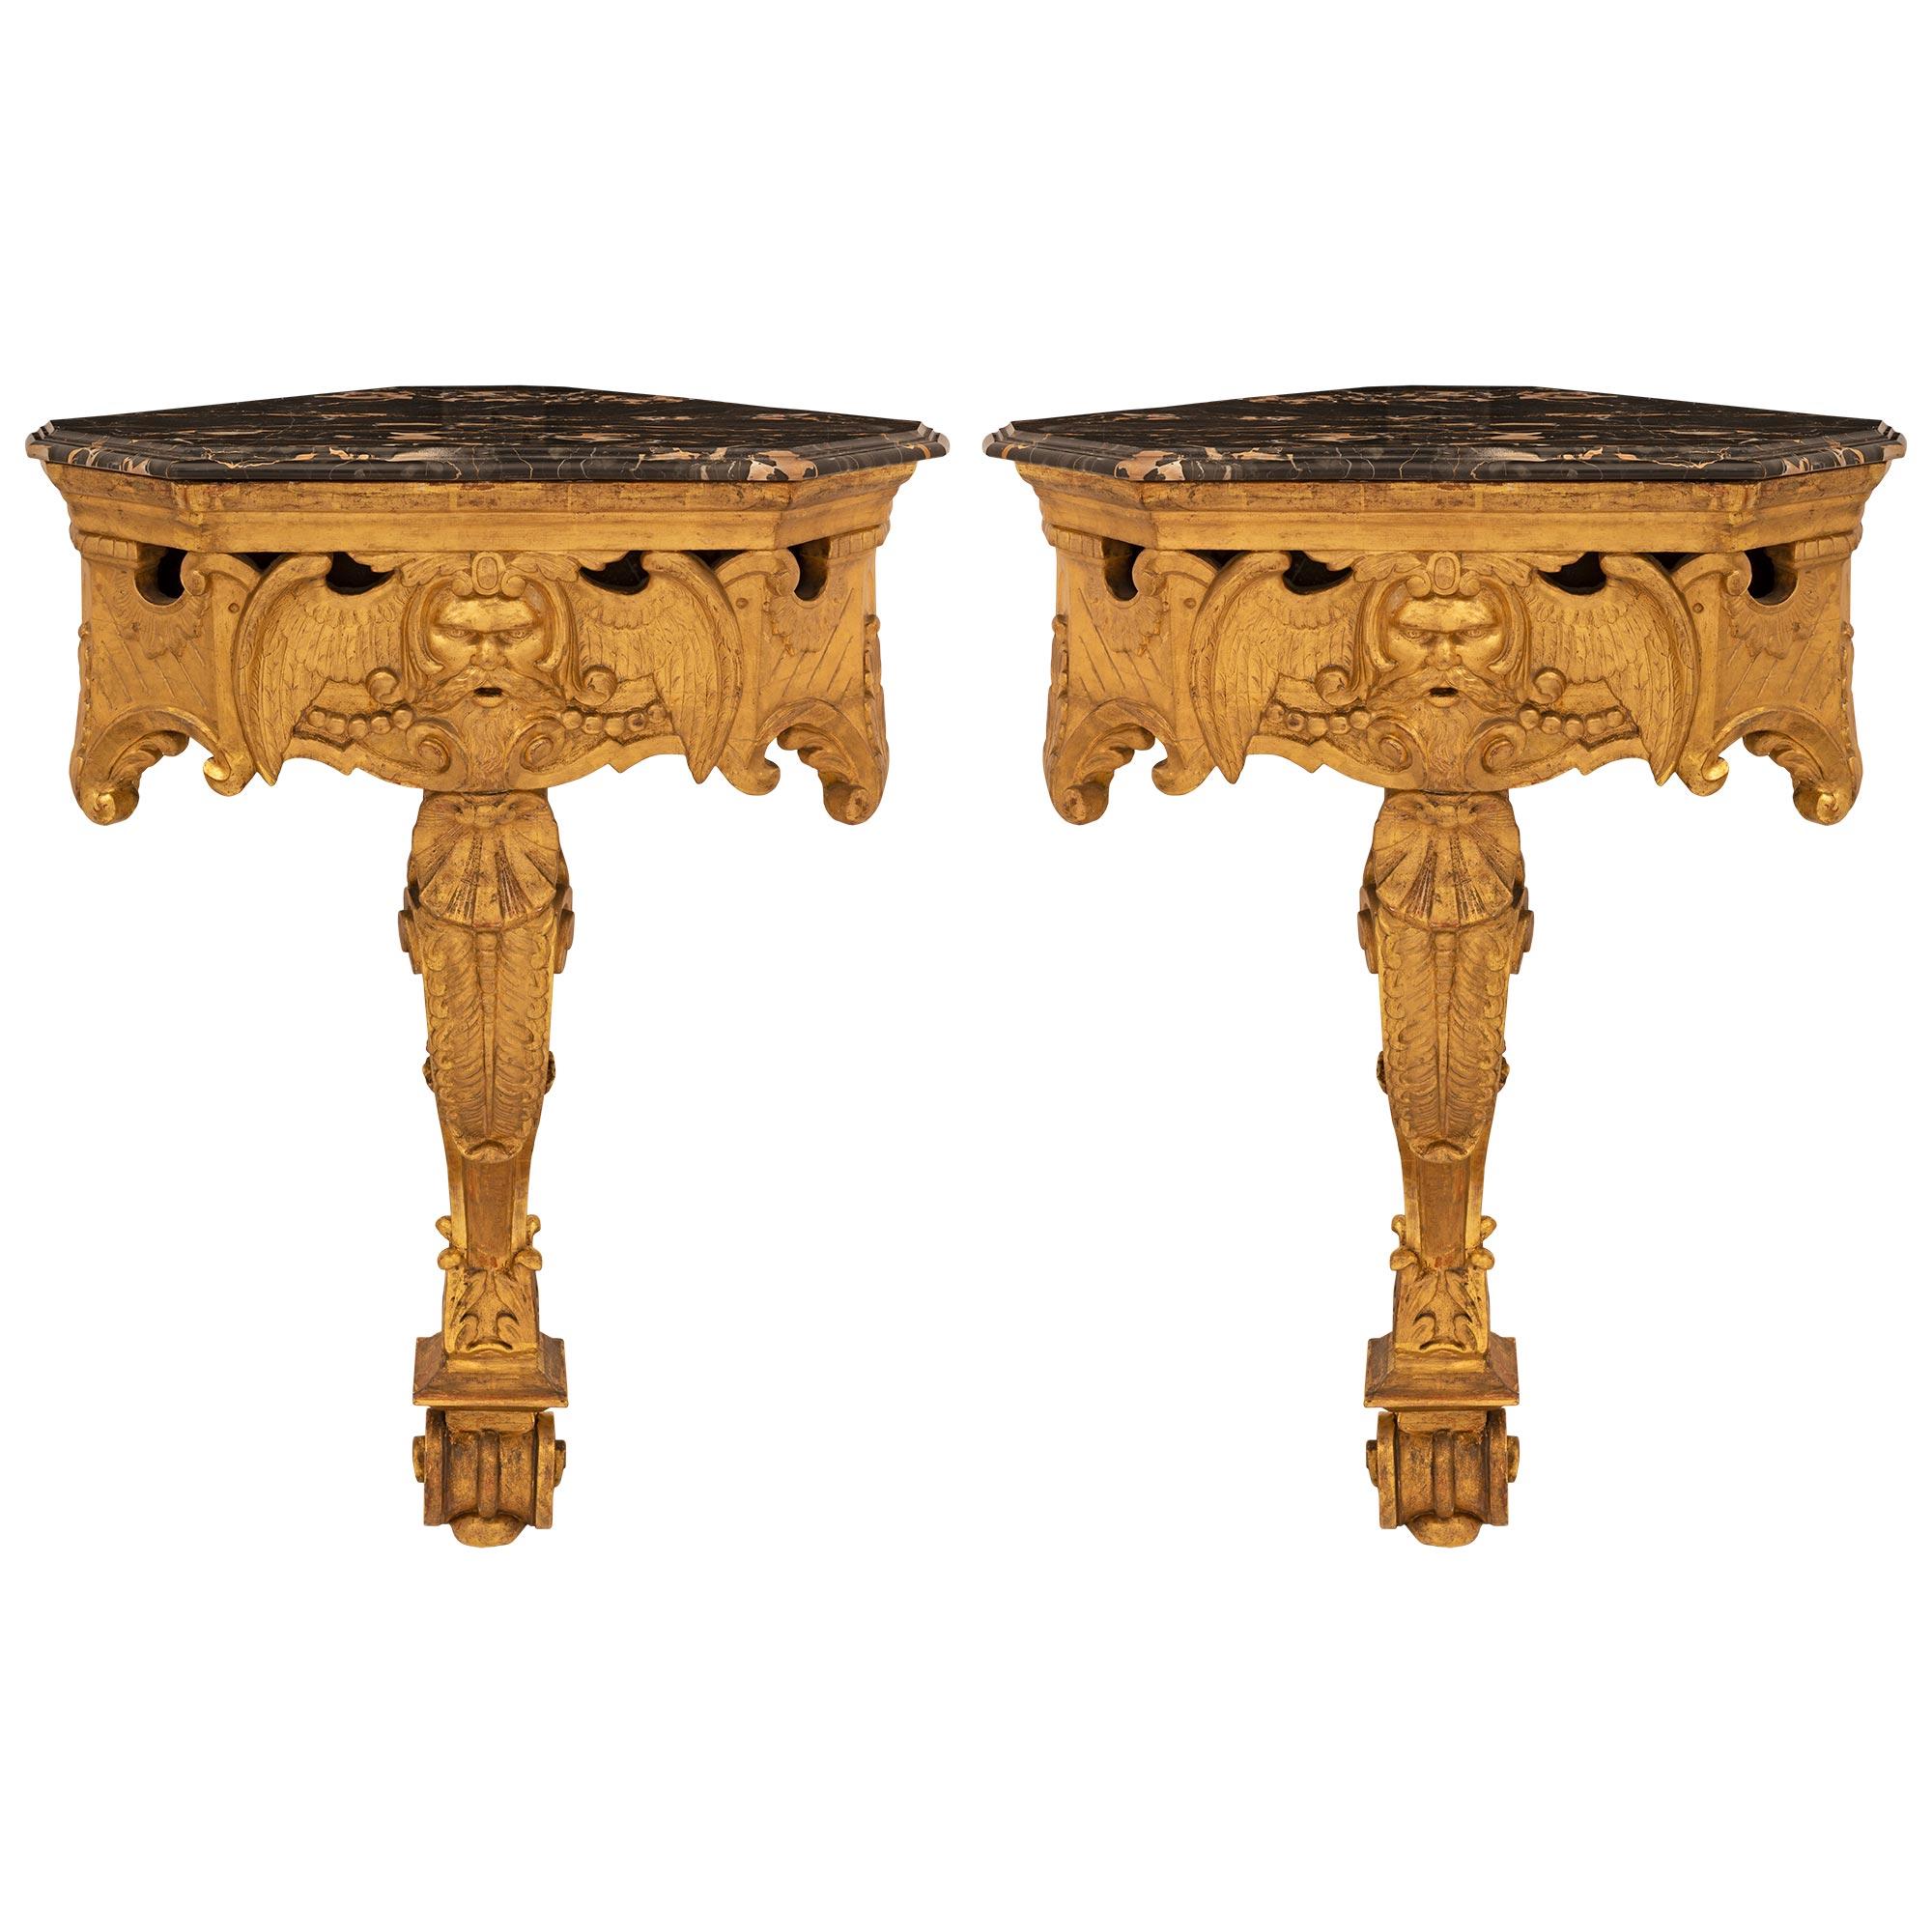 An impressive and exceptionally decorative pair of Italian early 19th century Baroque st. giltwood and Portoro marble consoles/planters. Each wall mounted console is raised by a striking single scrolled support with beautiful feet and adorned in